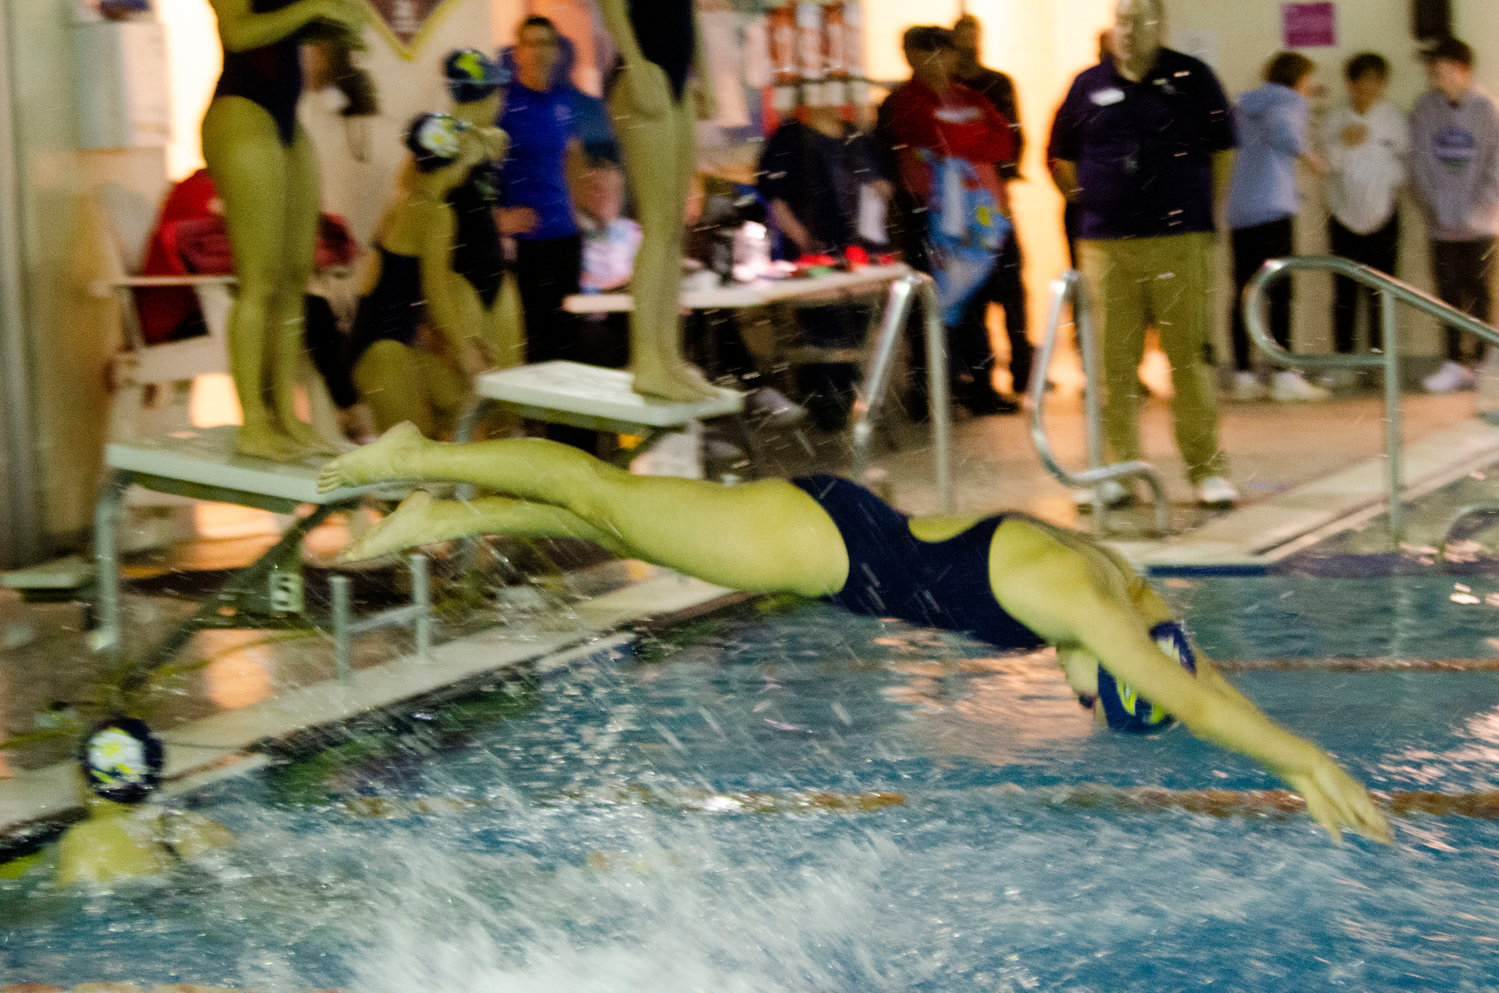 A Barrington swimmer dives into the water during the 200 free relay.